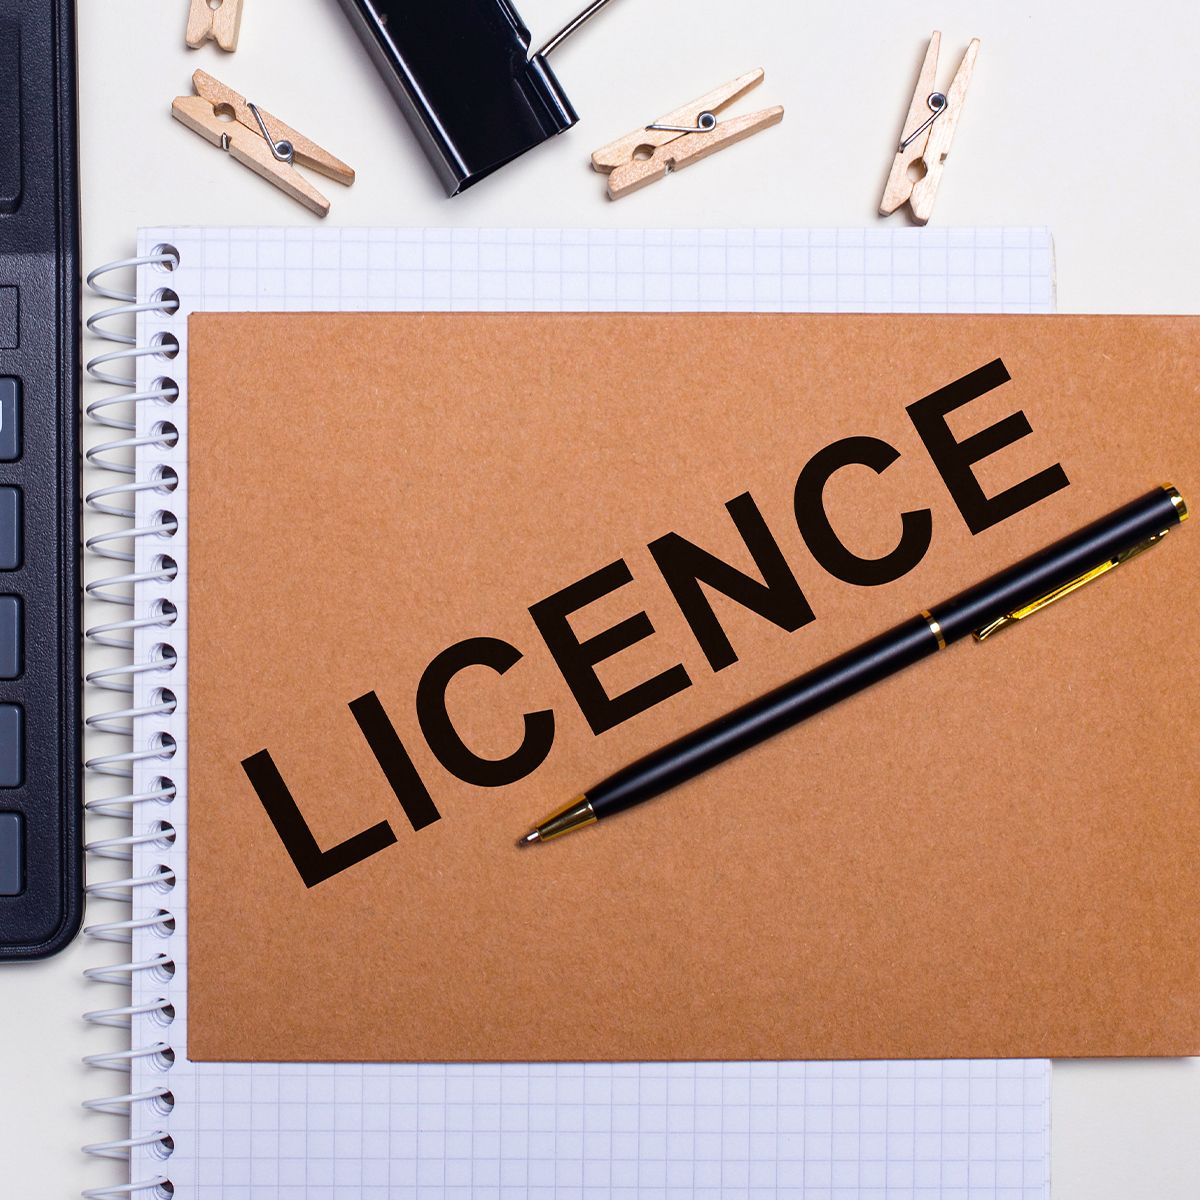 Licence, Permits and Trademarks